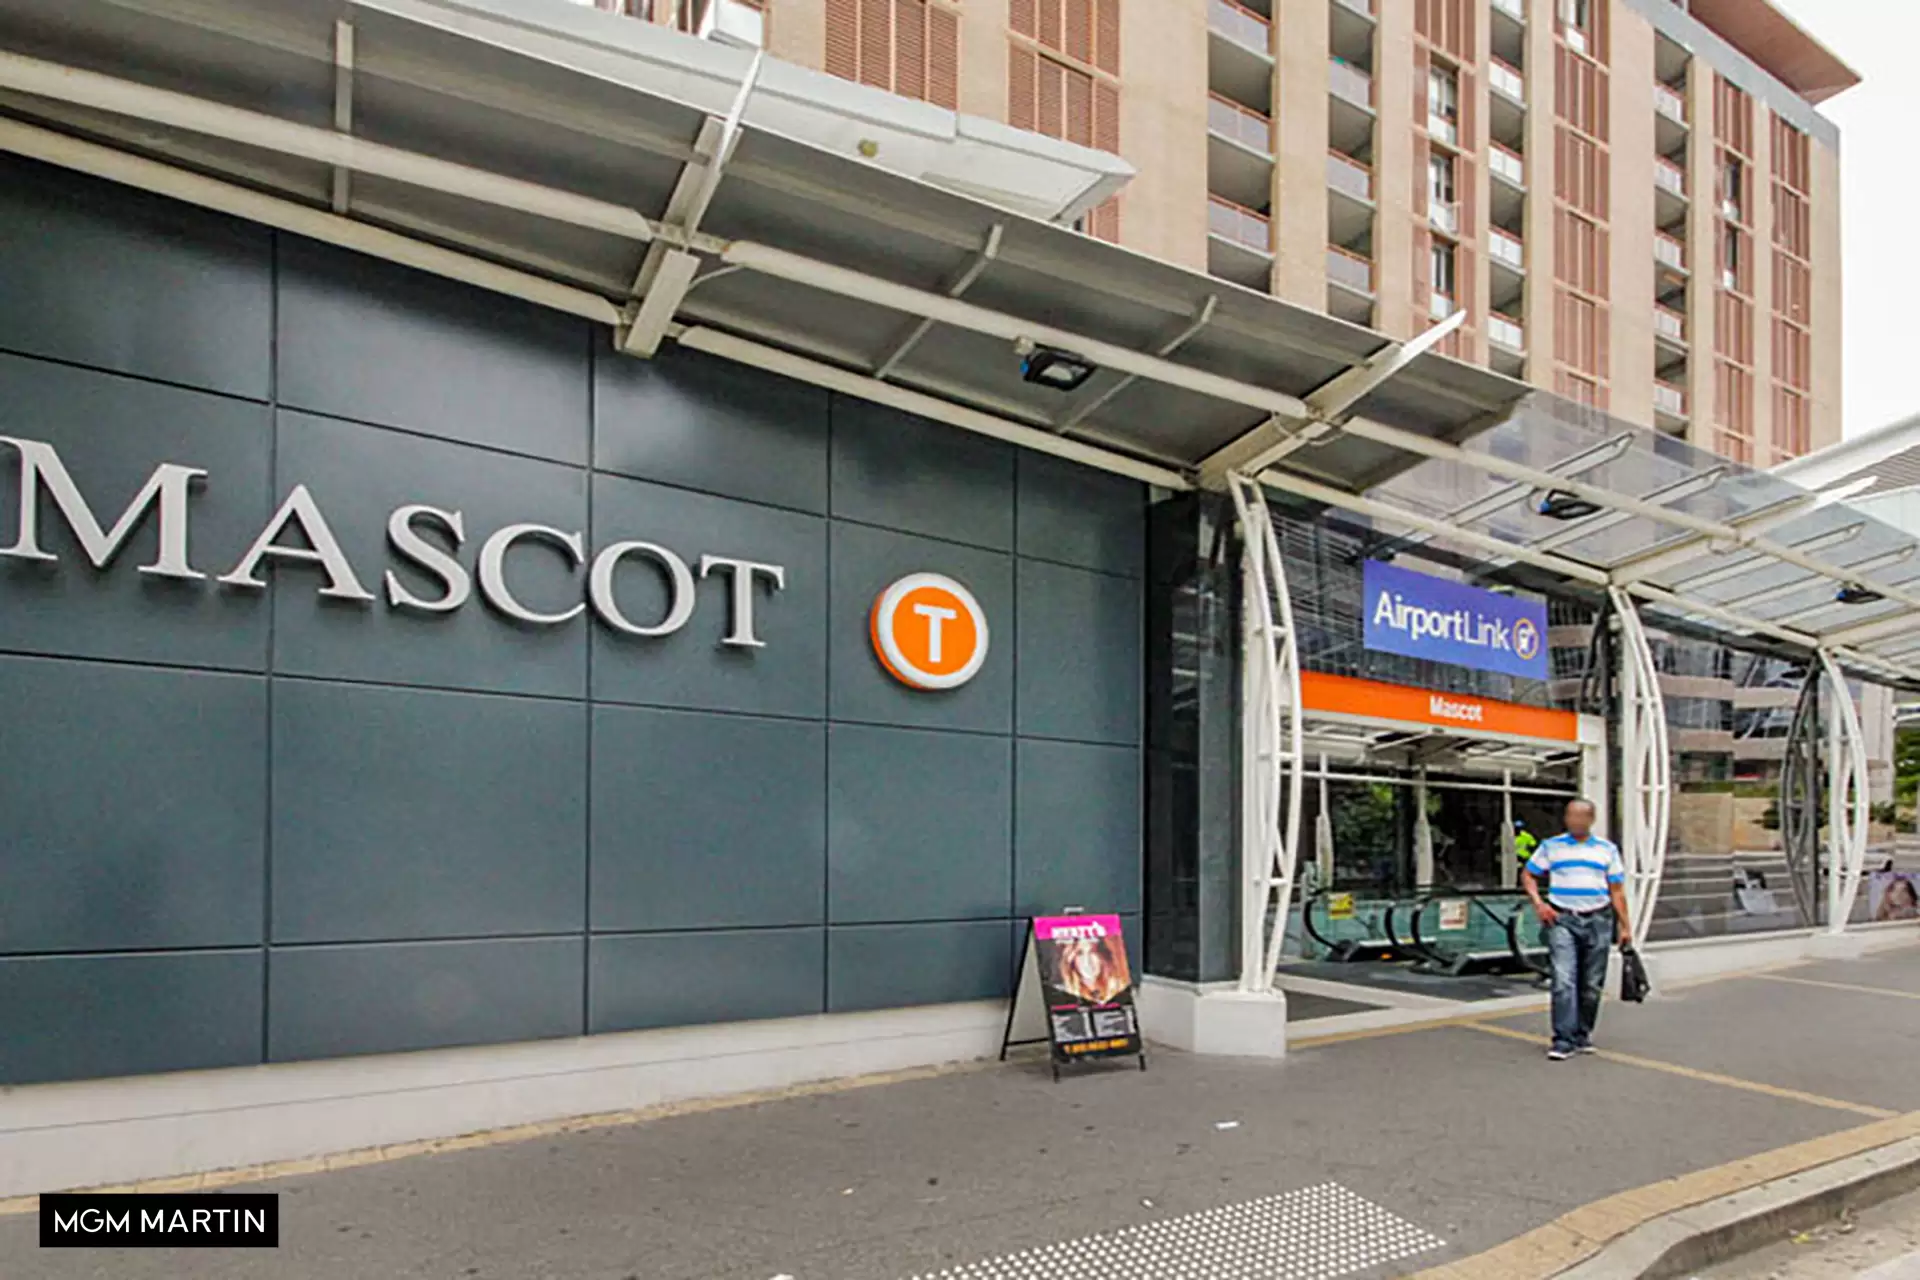 Suite 4/8 Bourke Street, Mascot For Lease by MGM Martin - image 1